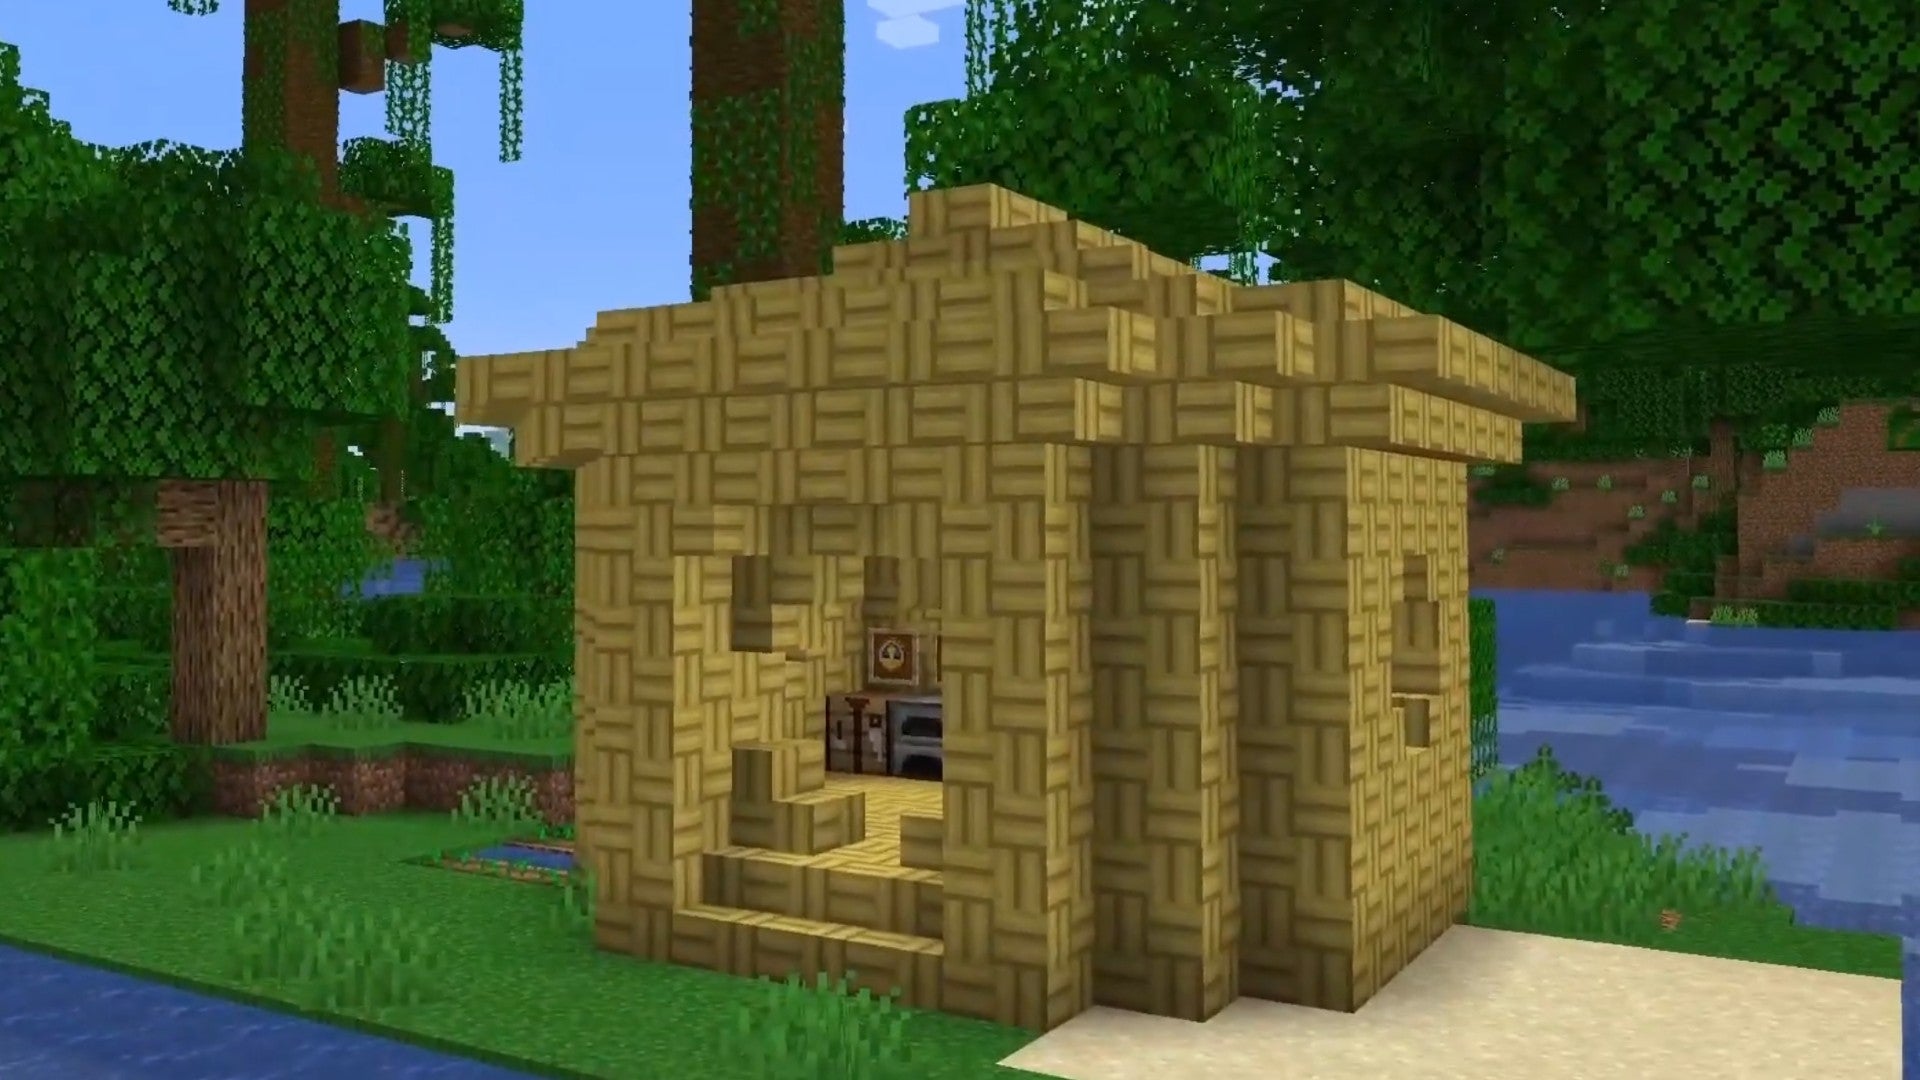 Minecraft 1.20 image showing a house built out of bamboo mosaic blocks. It is in a jungle and by a river.